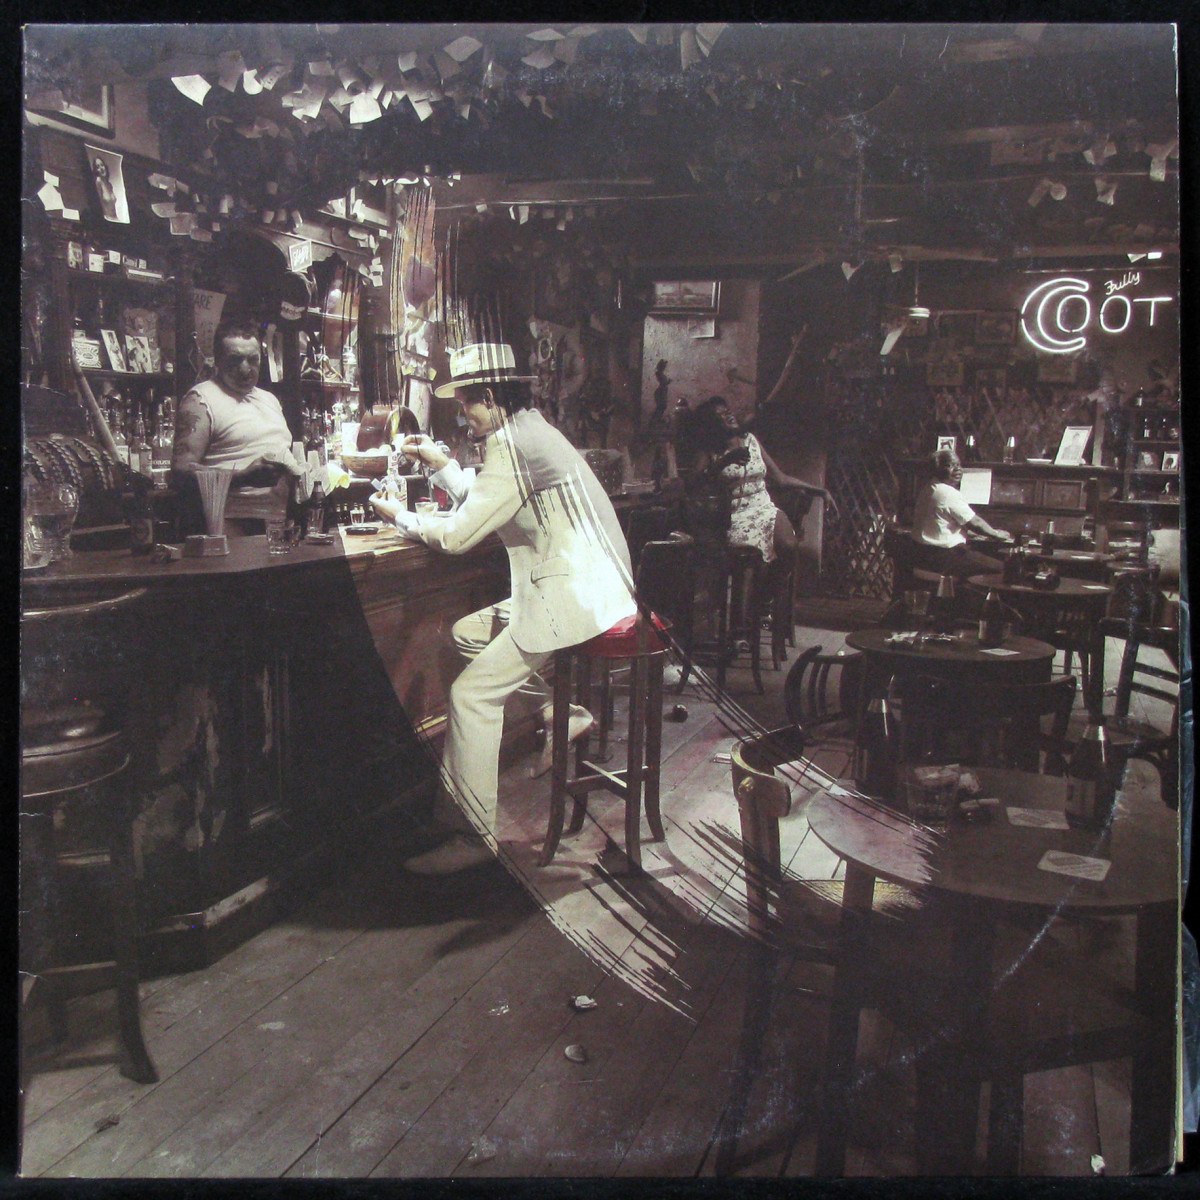 LP Led Zeppelin — In Through The Out Door фото